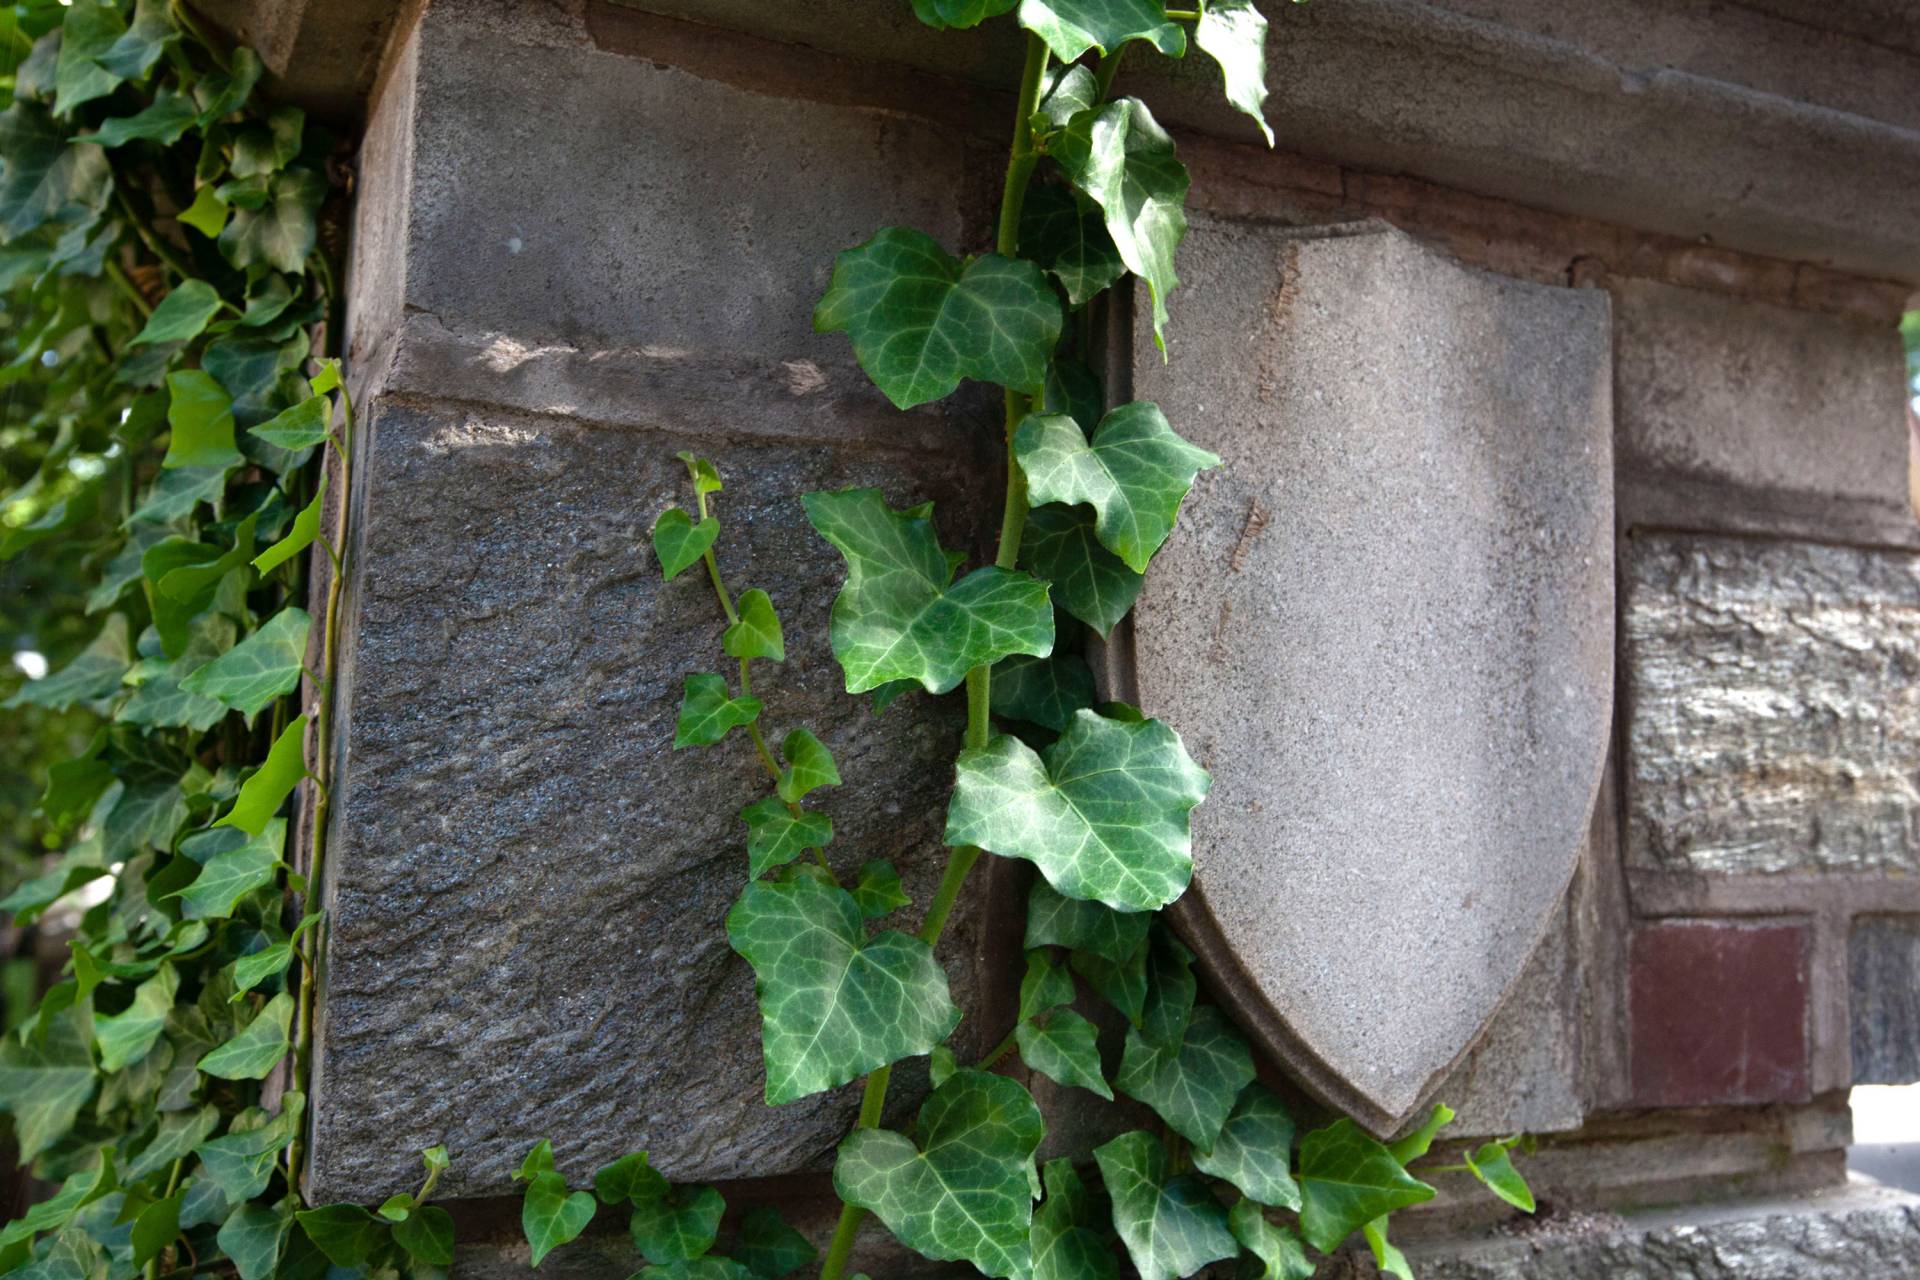 Ivy grows around a shield detail in a stone wall